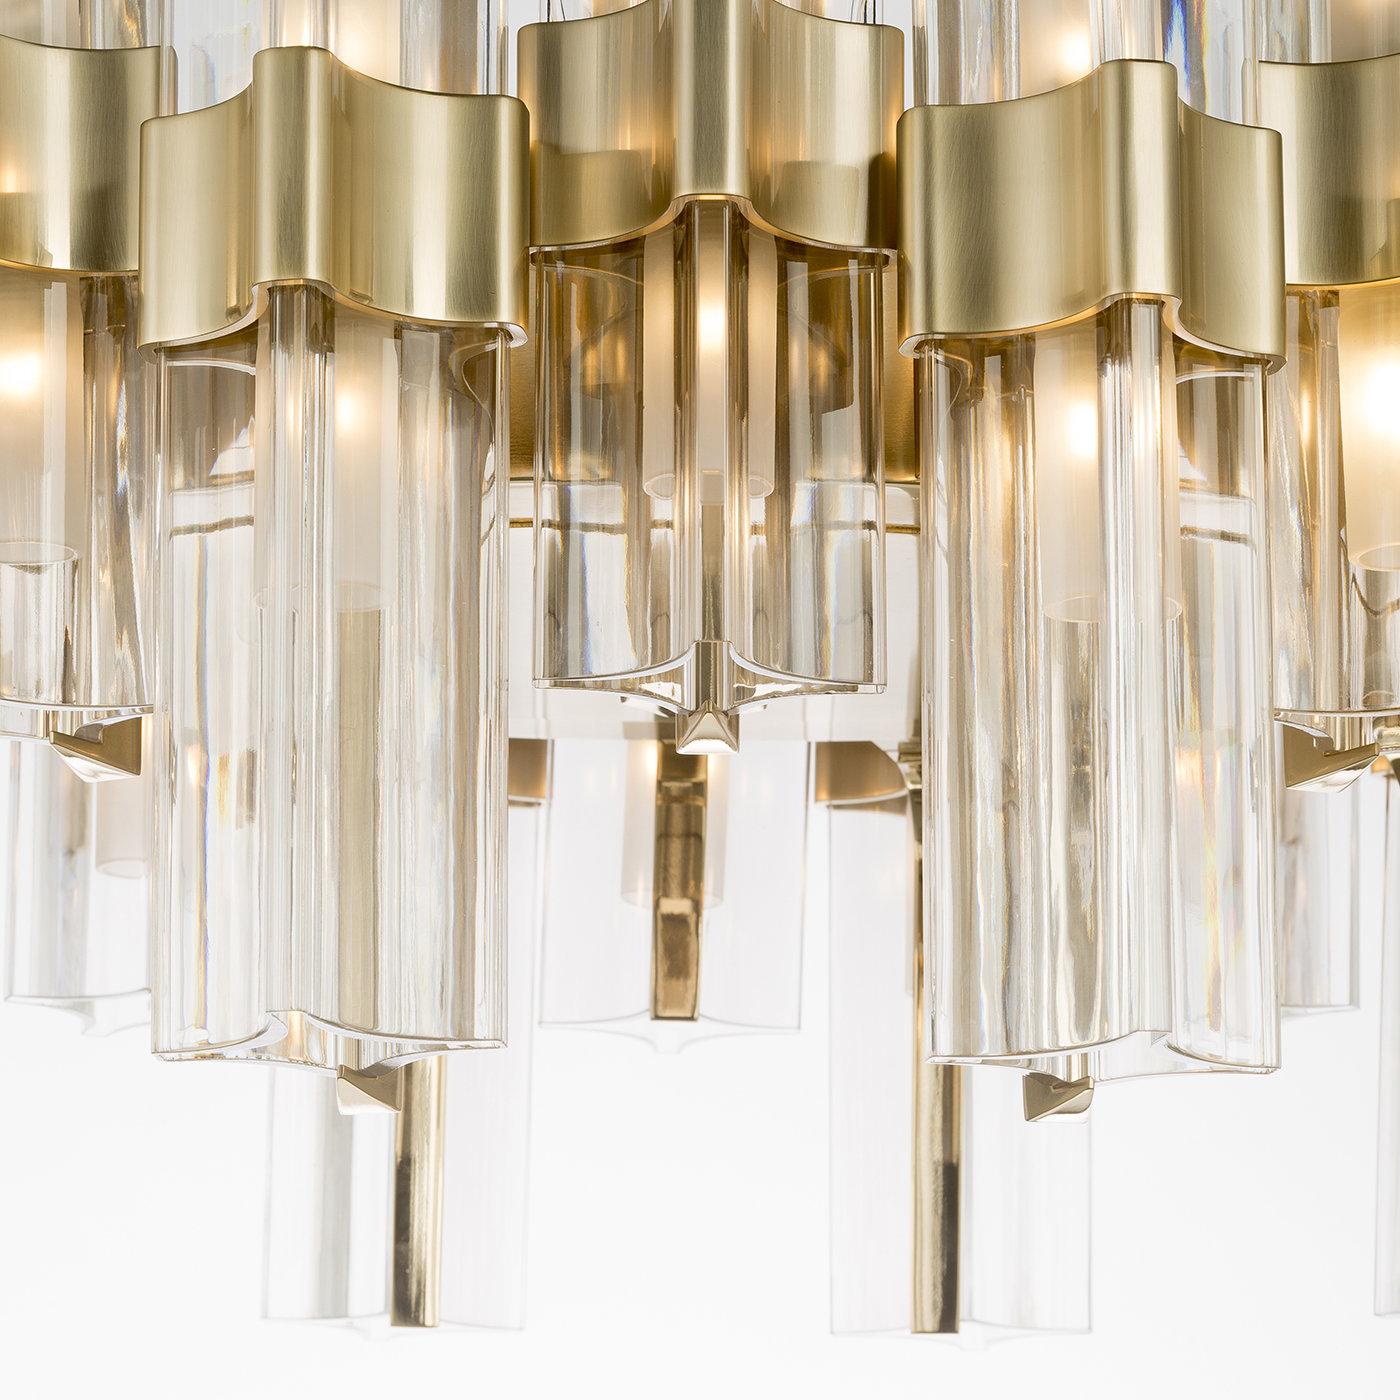 This stunning pendant light will illuminate any space. Crystal shades with metal accents, arranged in a circular form, hang off double metal arms for a contrast in form and materials in this piece, part of the Eterea collection, that is a triumph of